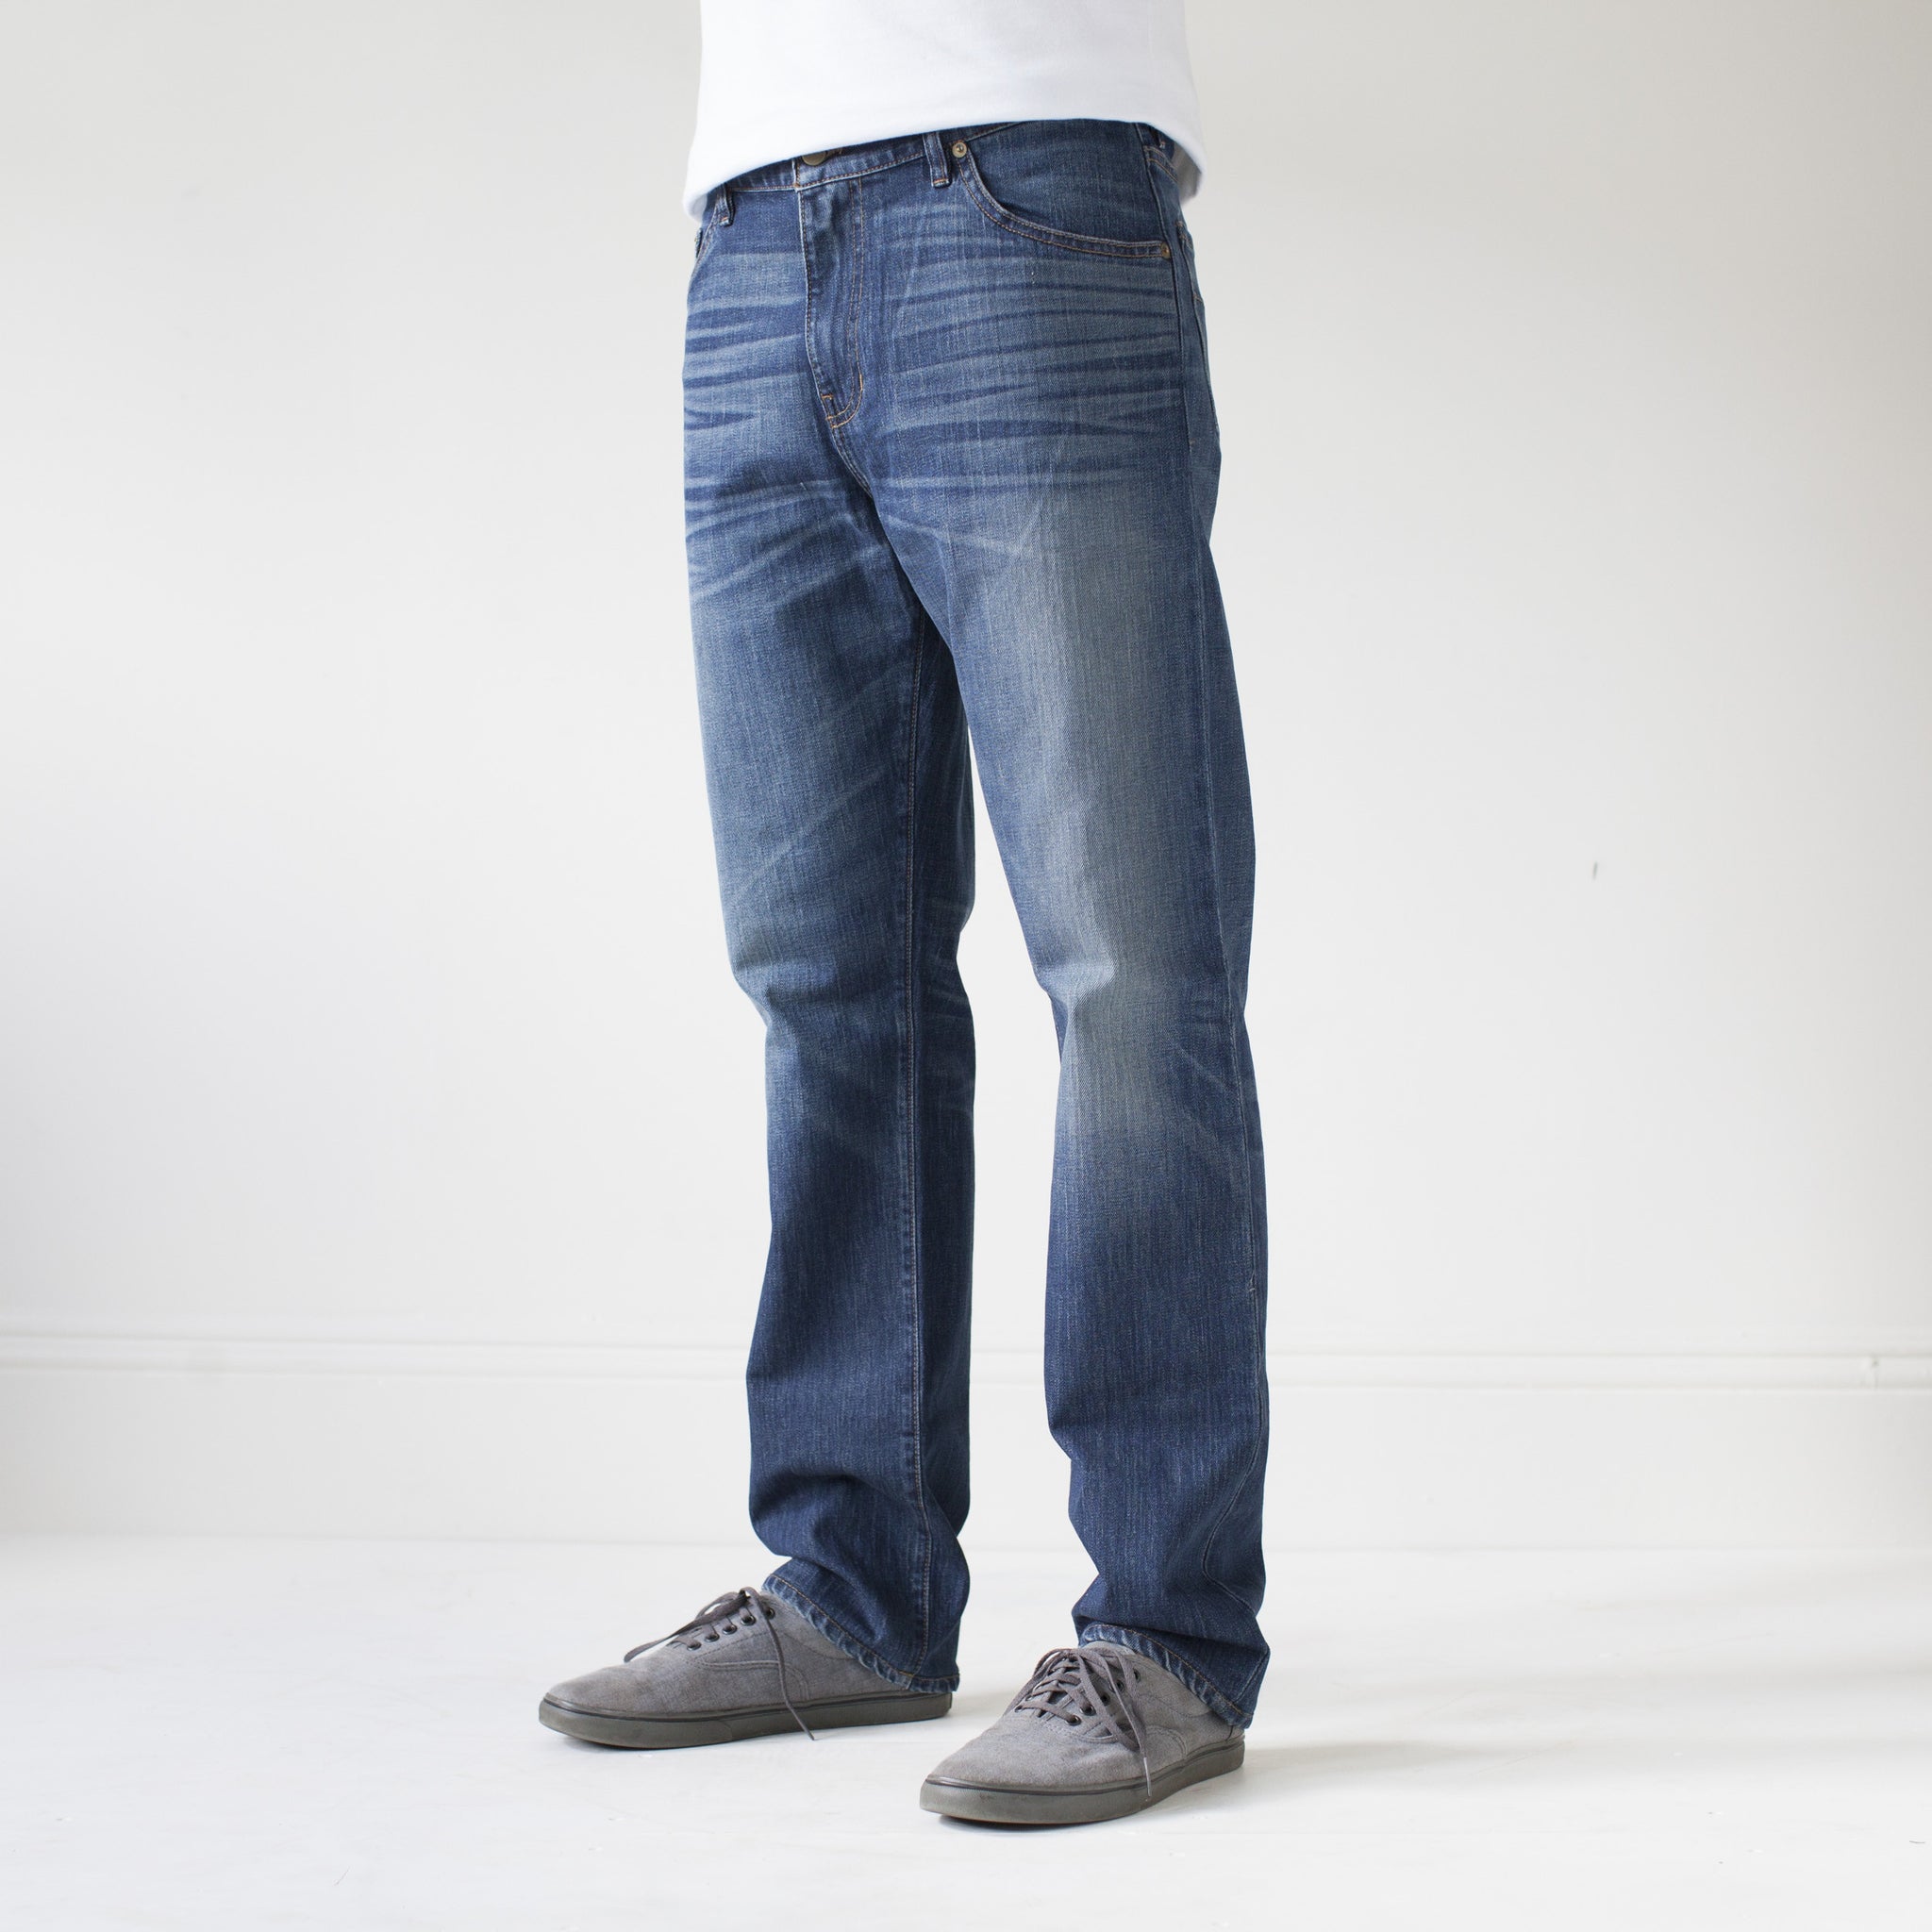 angle: 319  A model wears Raleigh Denim Workshop Alexander work fit jeans in the 319 wash, side view